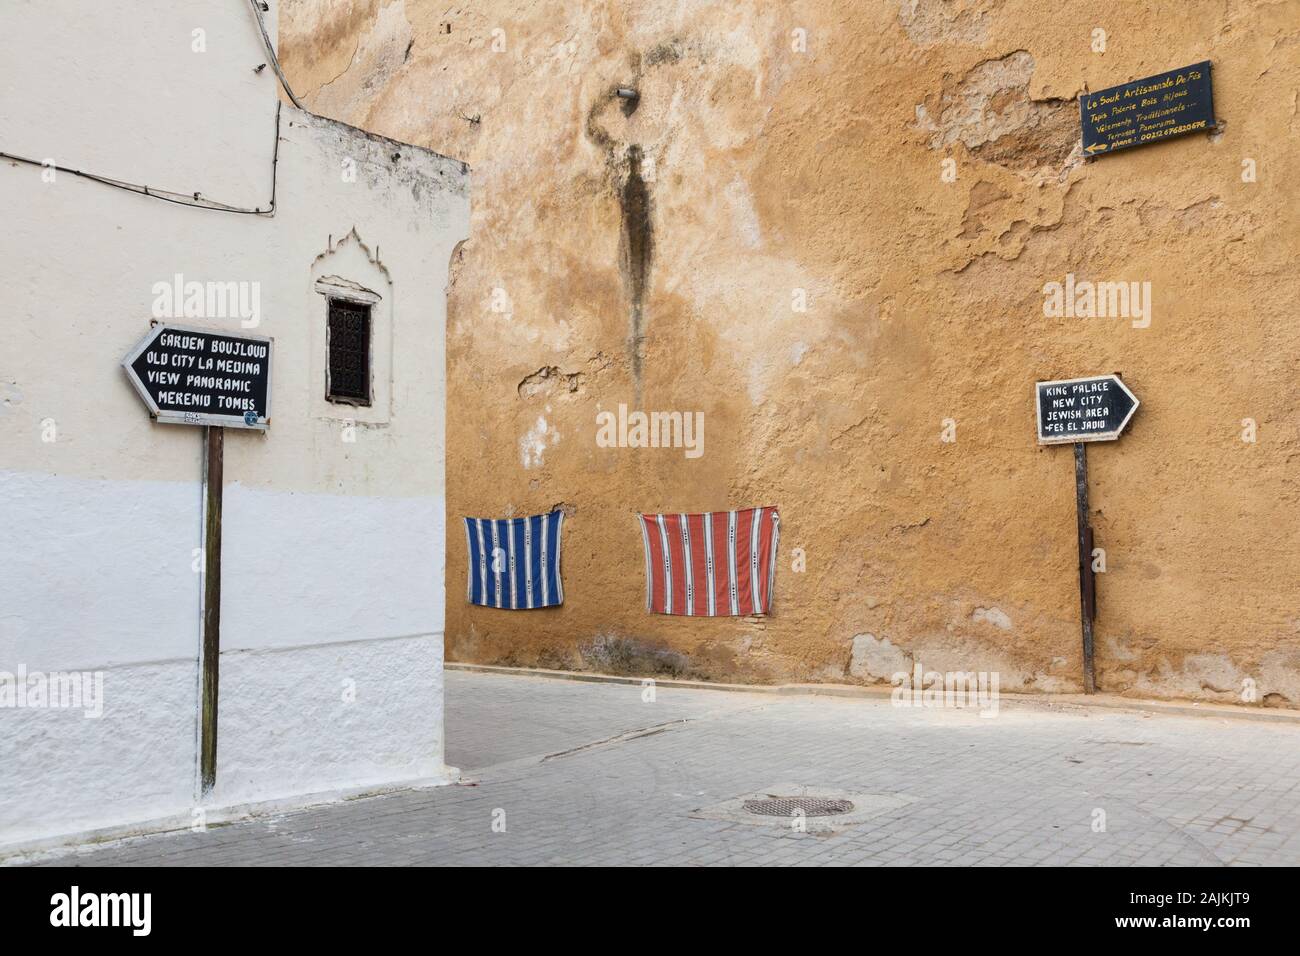 Scenery of Fes (Fez) in Morocco with signposts showing the way to the popular tourist attractions and some interesting fabrics on the wall Stock Photo